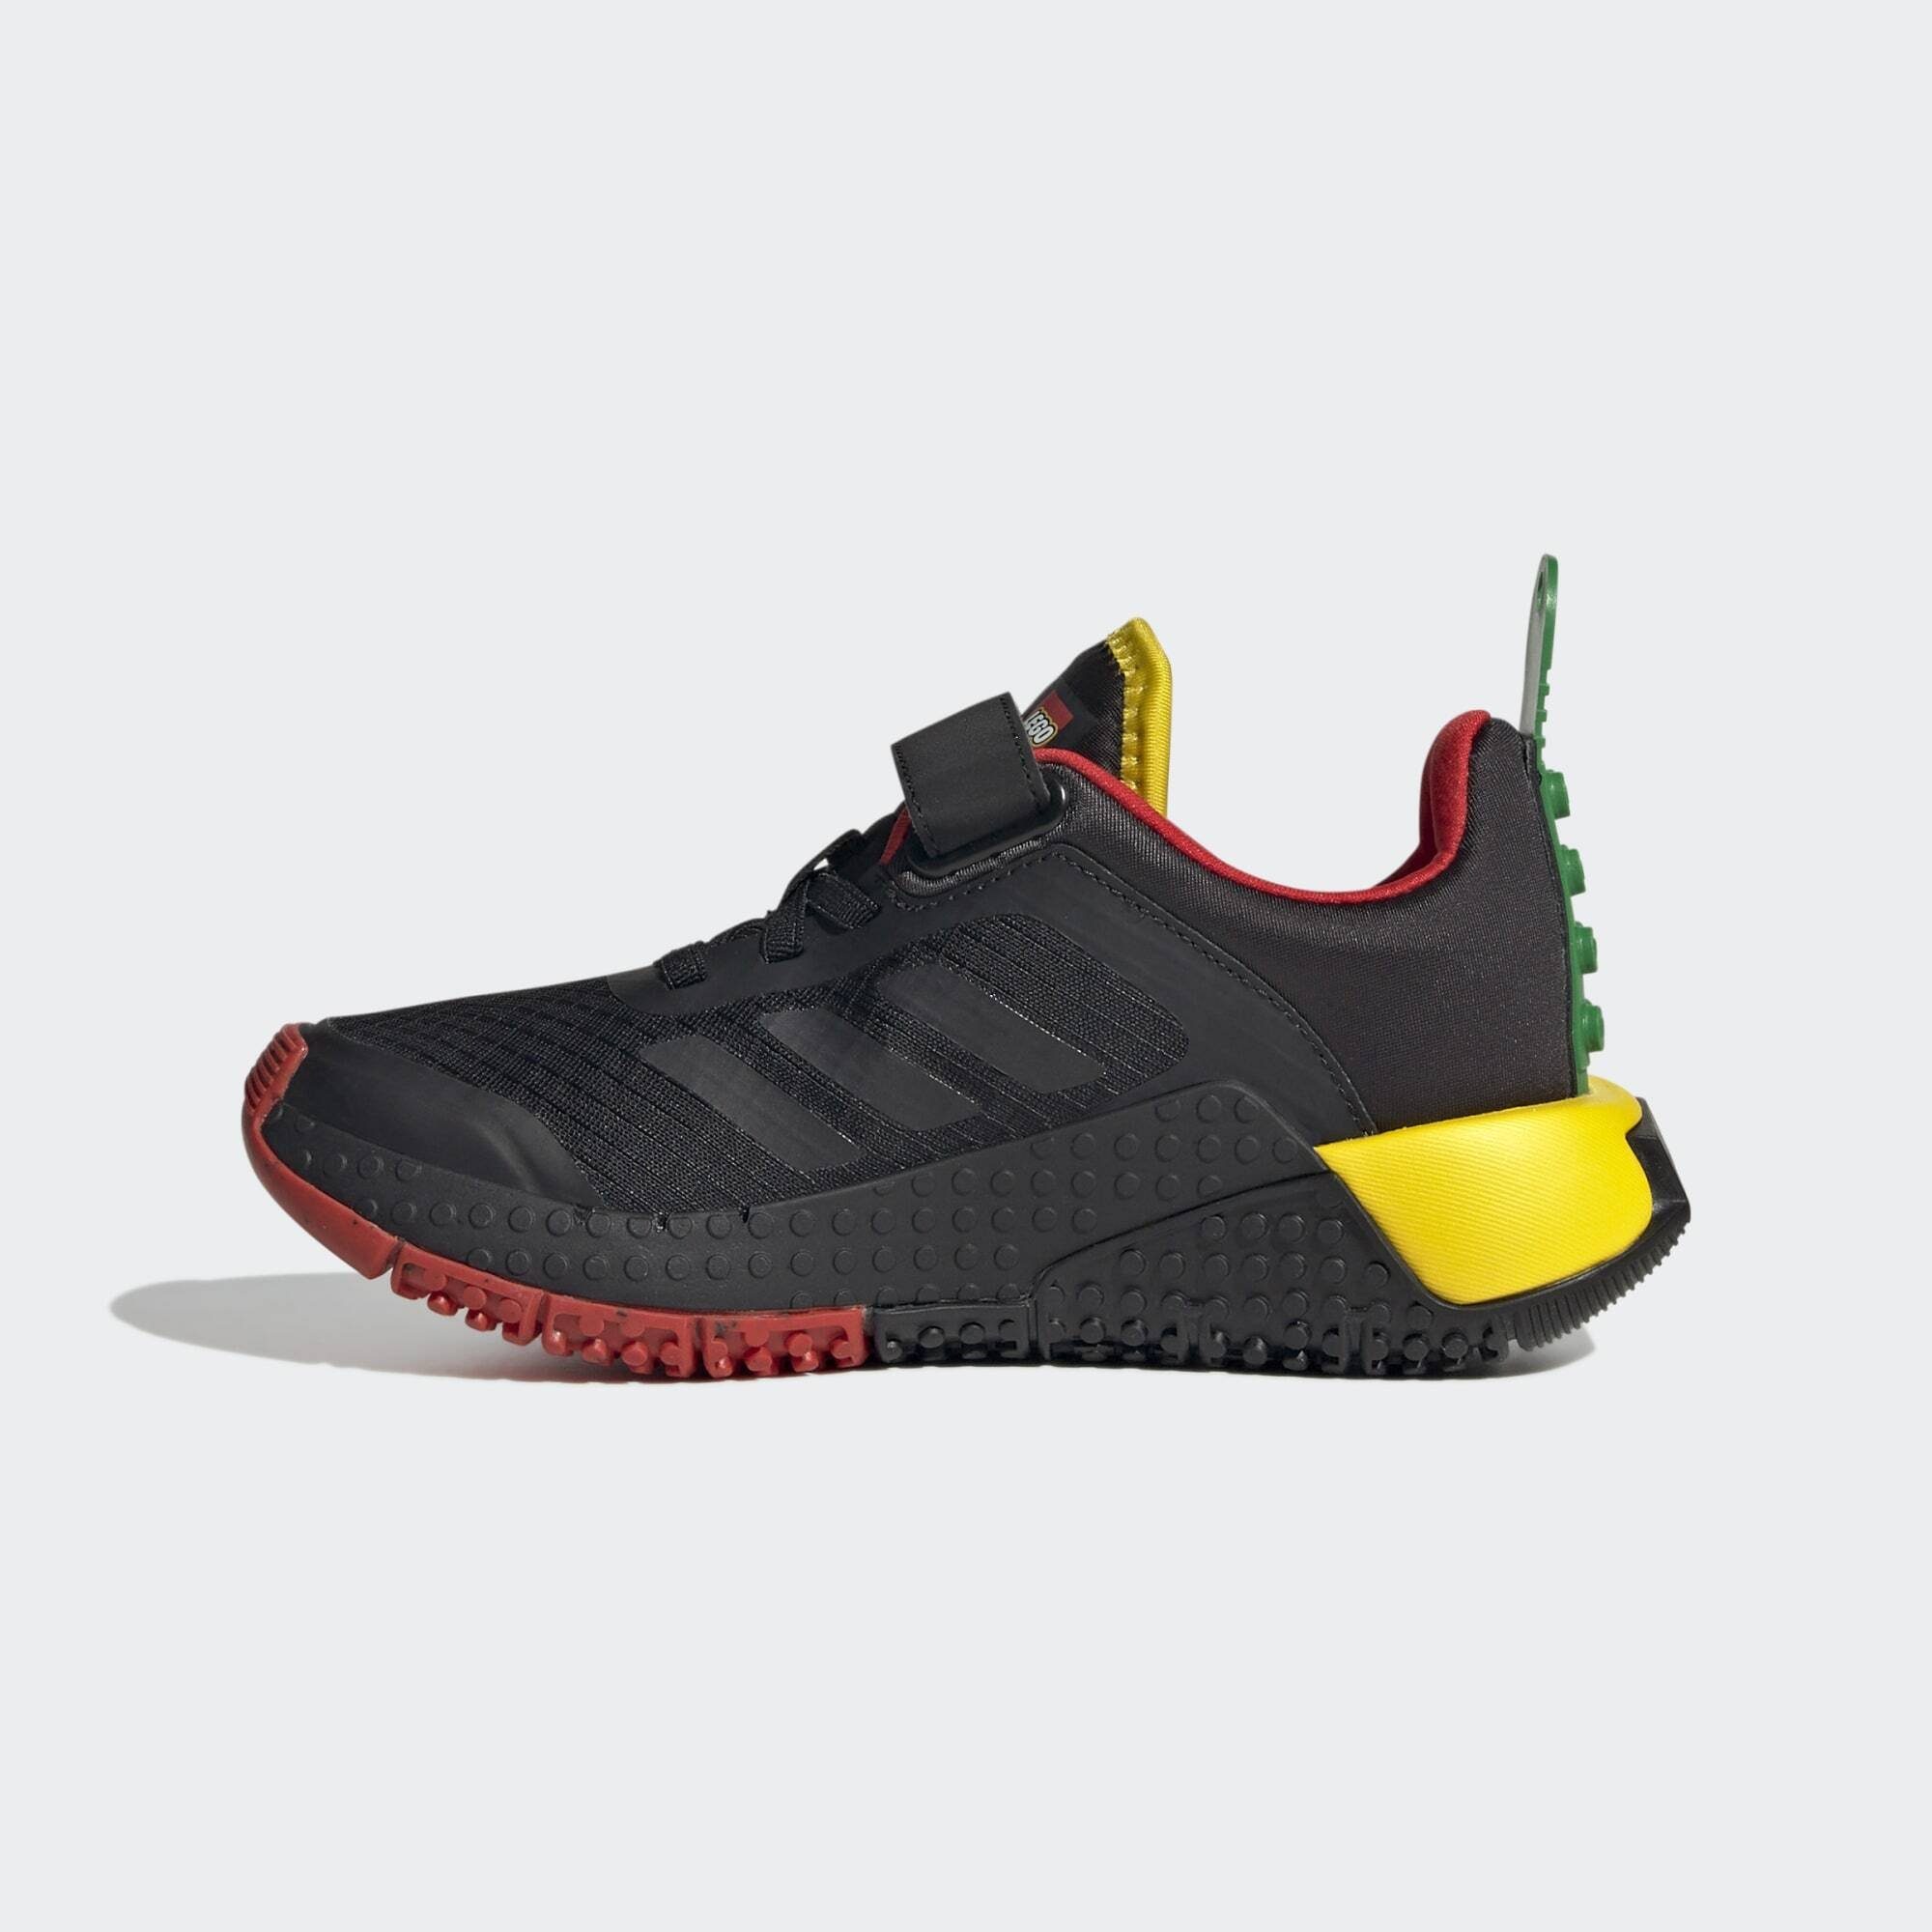 / SCHUH Core Sneaker DNA ADIDAS LEGO TOP Black Red Core X LACE / adidas Sportswear AND Black ELASTIC STRAP